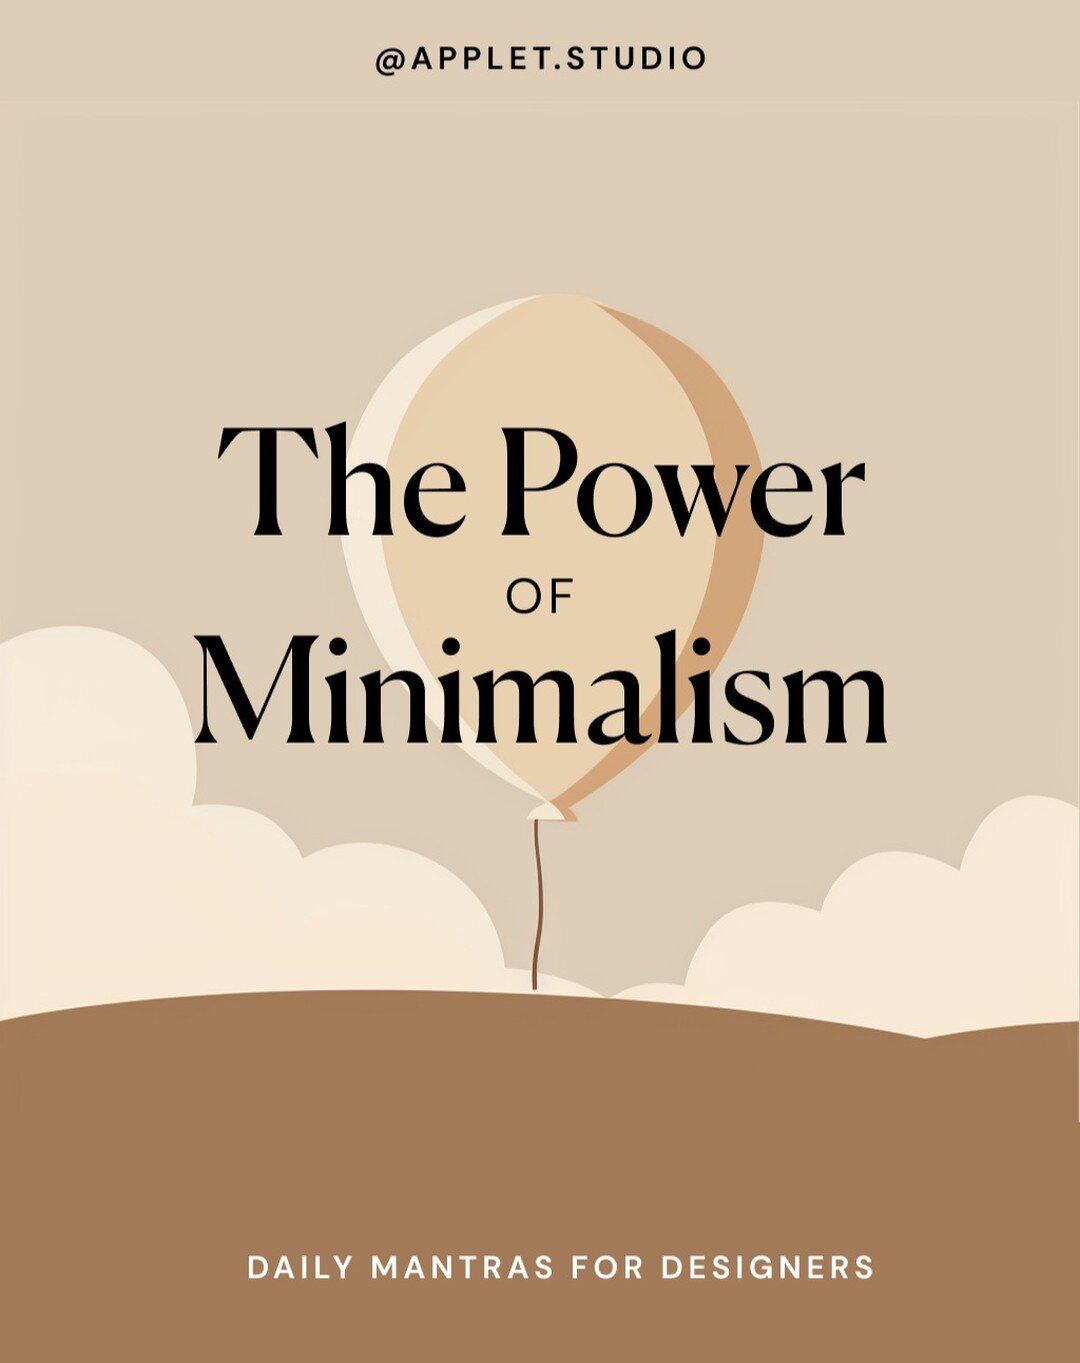 Making a simple design is harder than creating a busy design. Minimalism teaches us the art of letting go! Minimalistic doesn't mean boring or basic, rather - intentional! #minimalism #squarespace #design